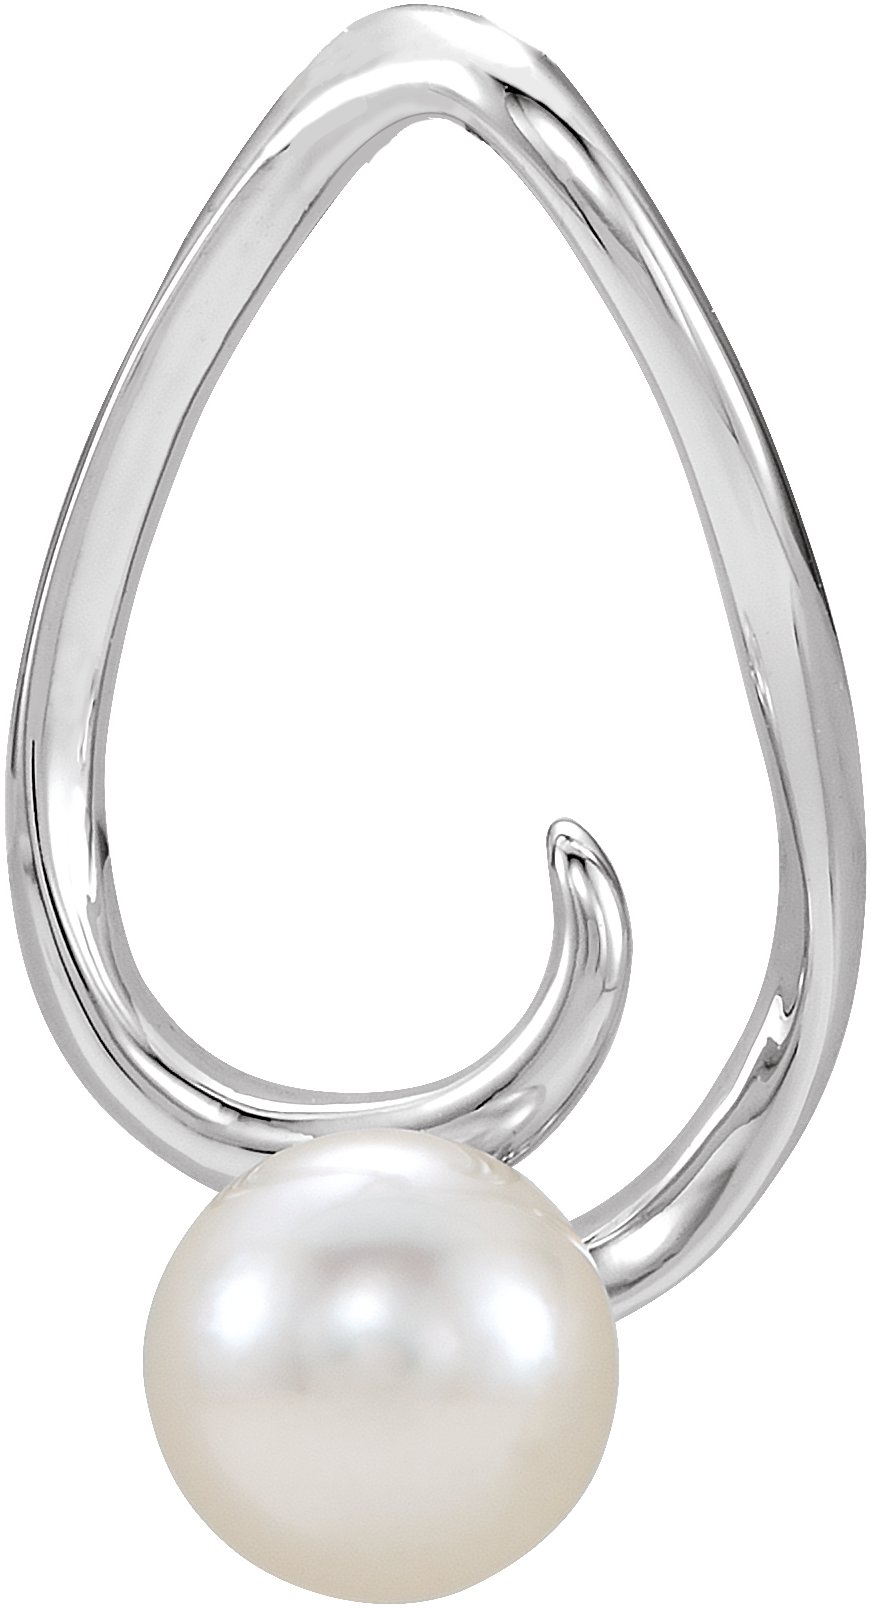 Sterling Silver Cultured White Freshwater Pearl Freeform Pendant